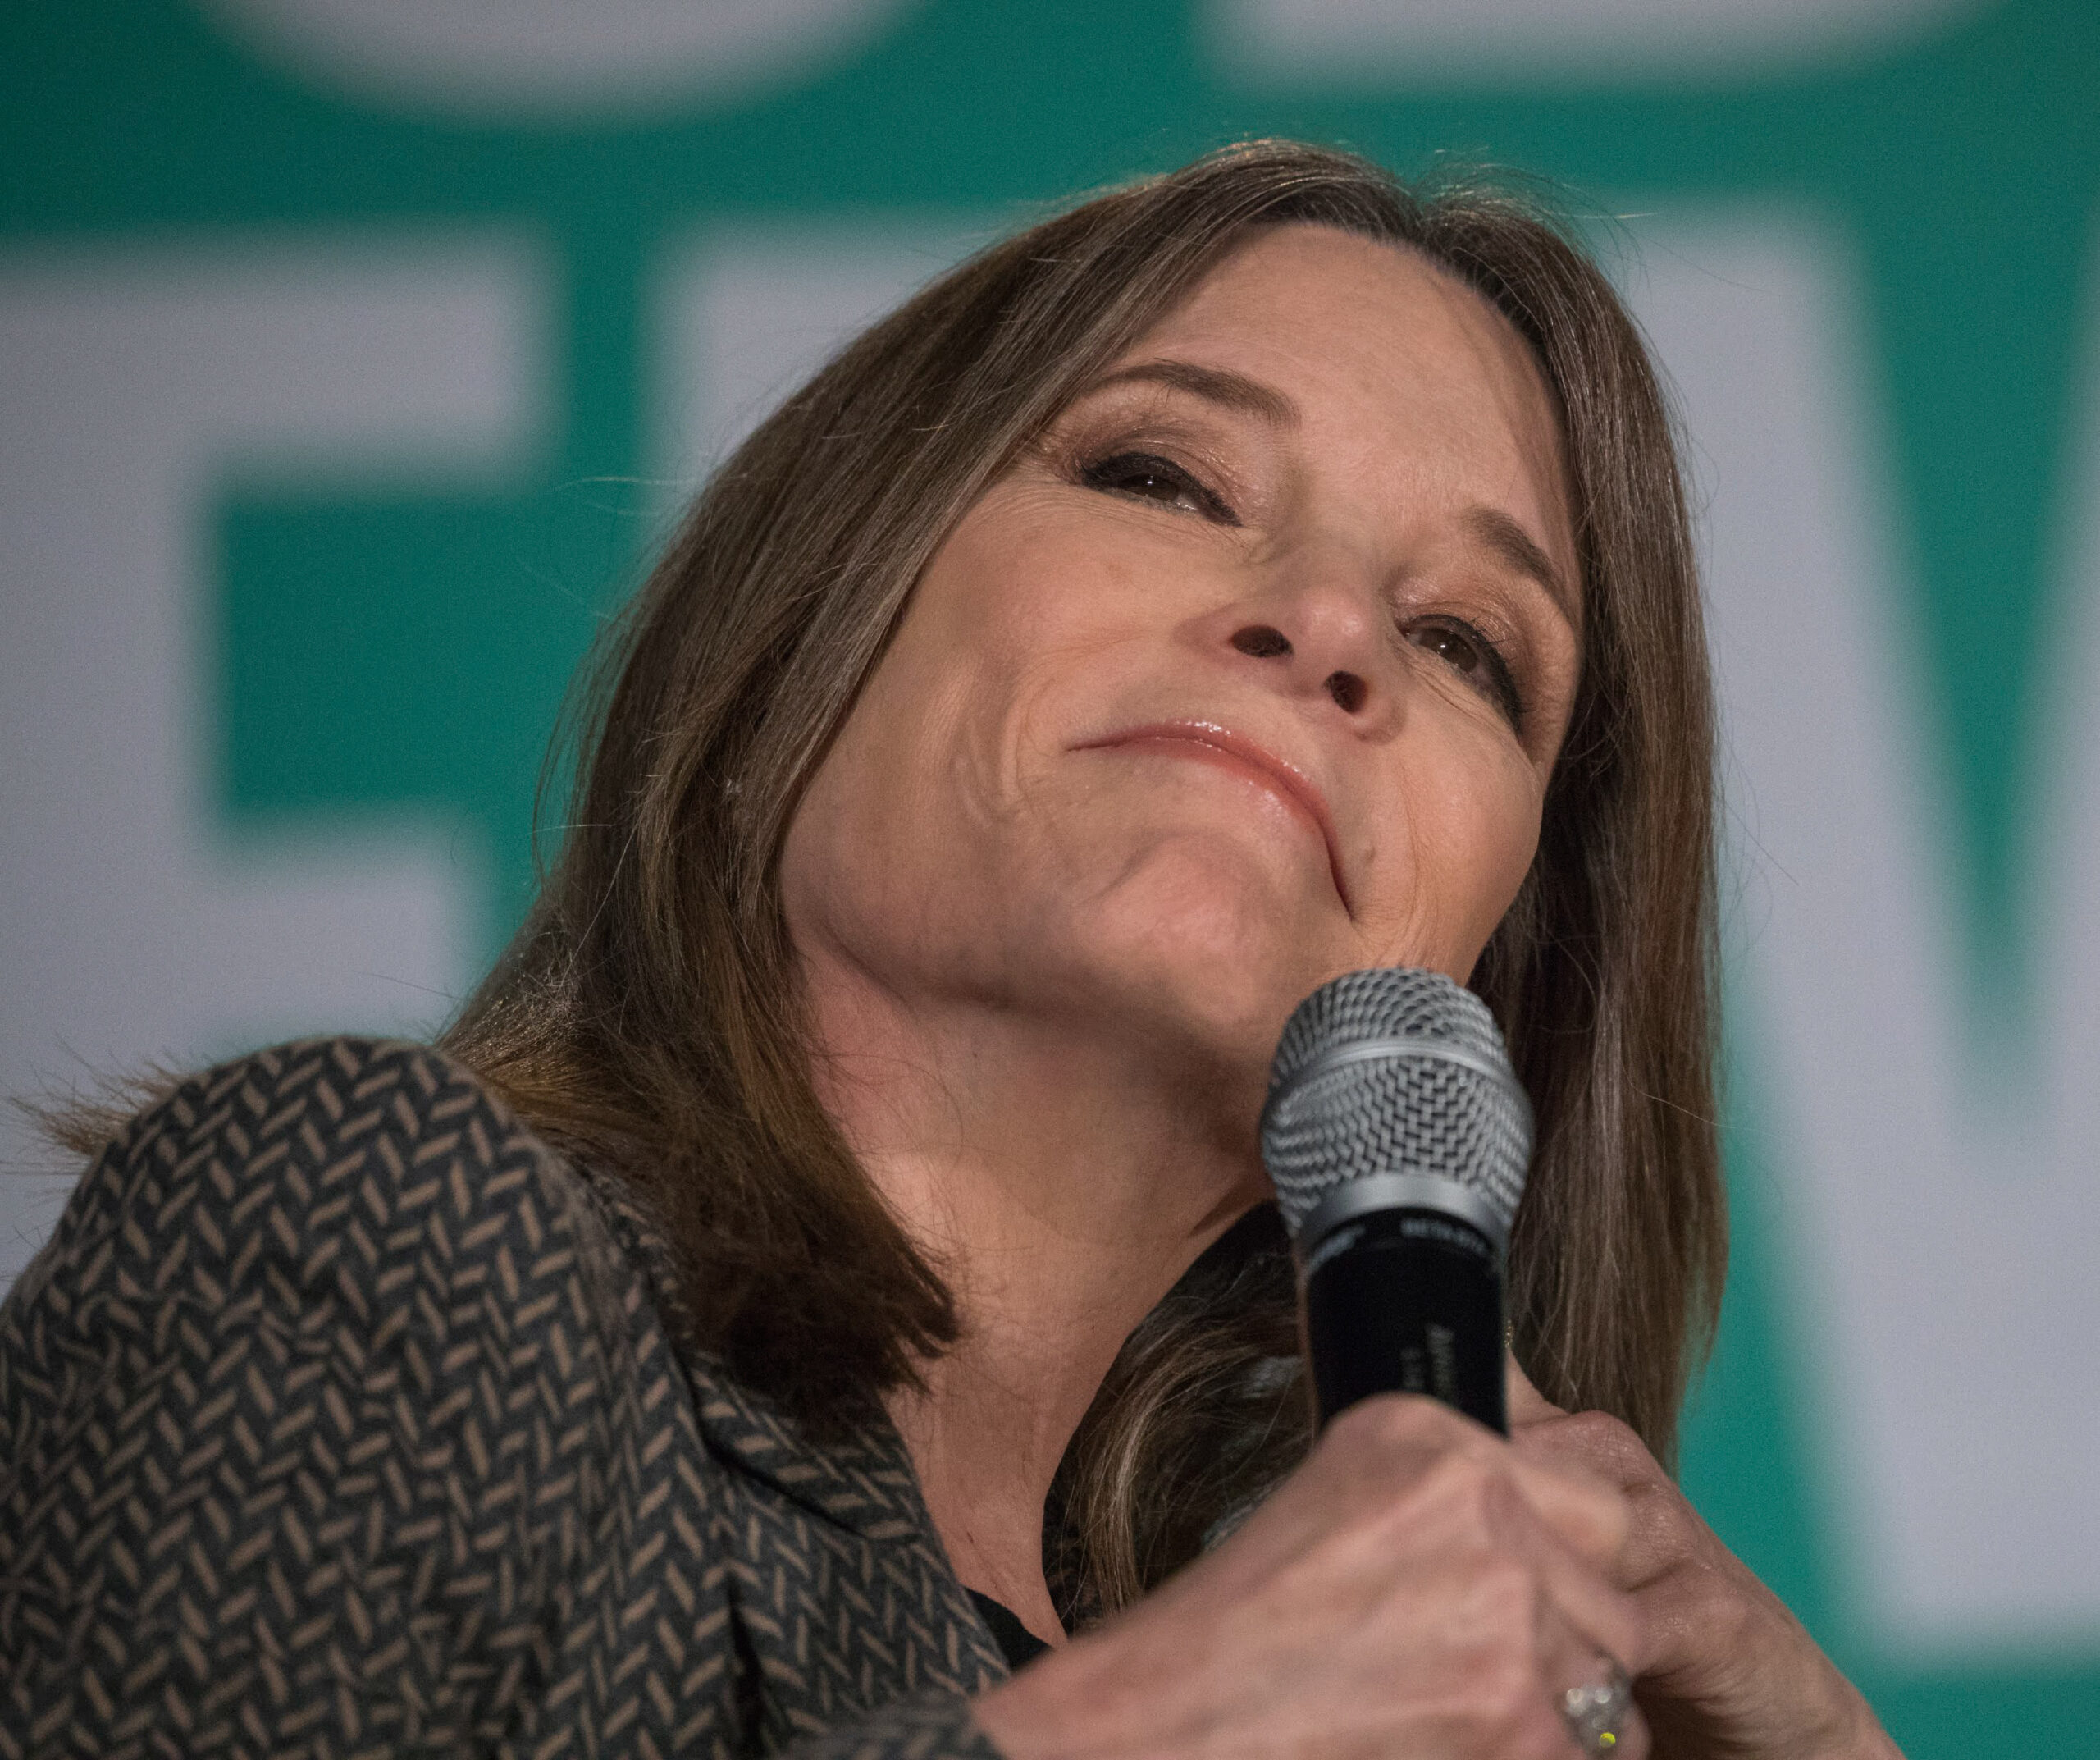 seeking-small-dollar-support-marianne-williamson-campaigns-in-vegas